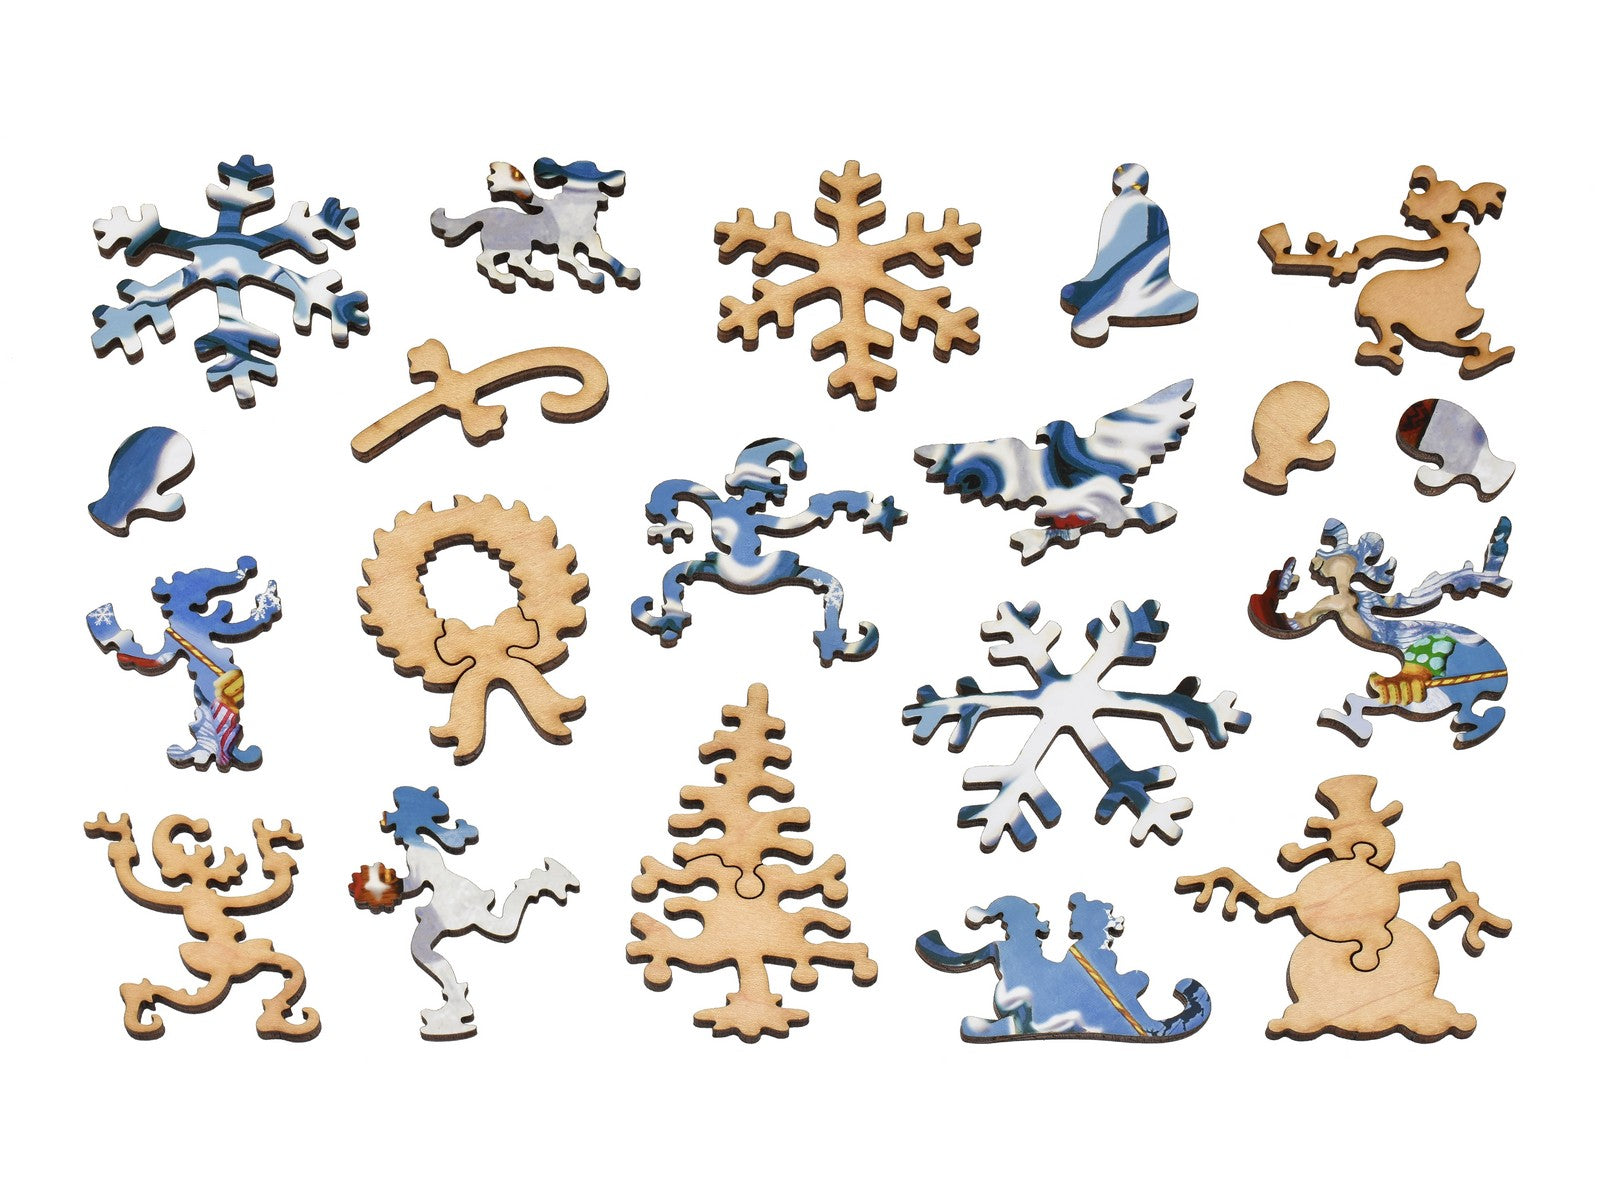 The whimsy pieces that can be found in the puzzle, Playin' Hookie.